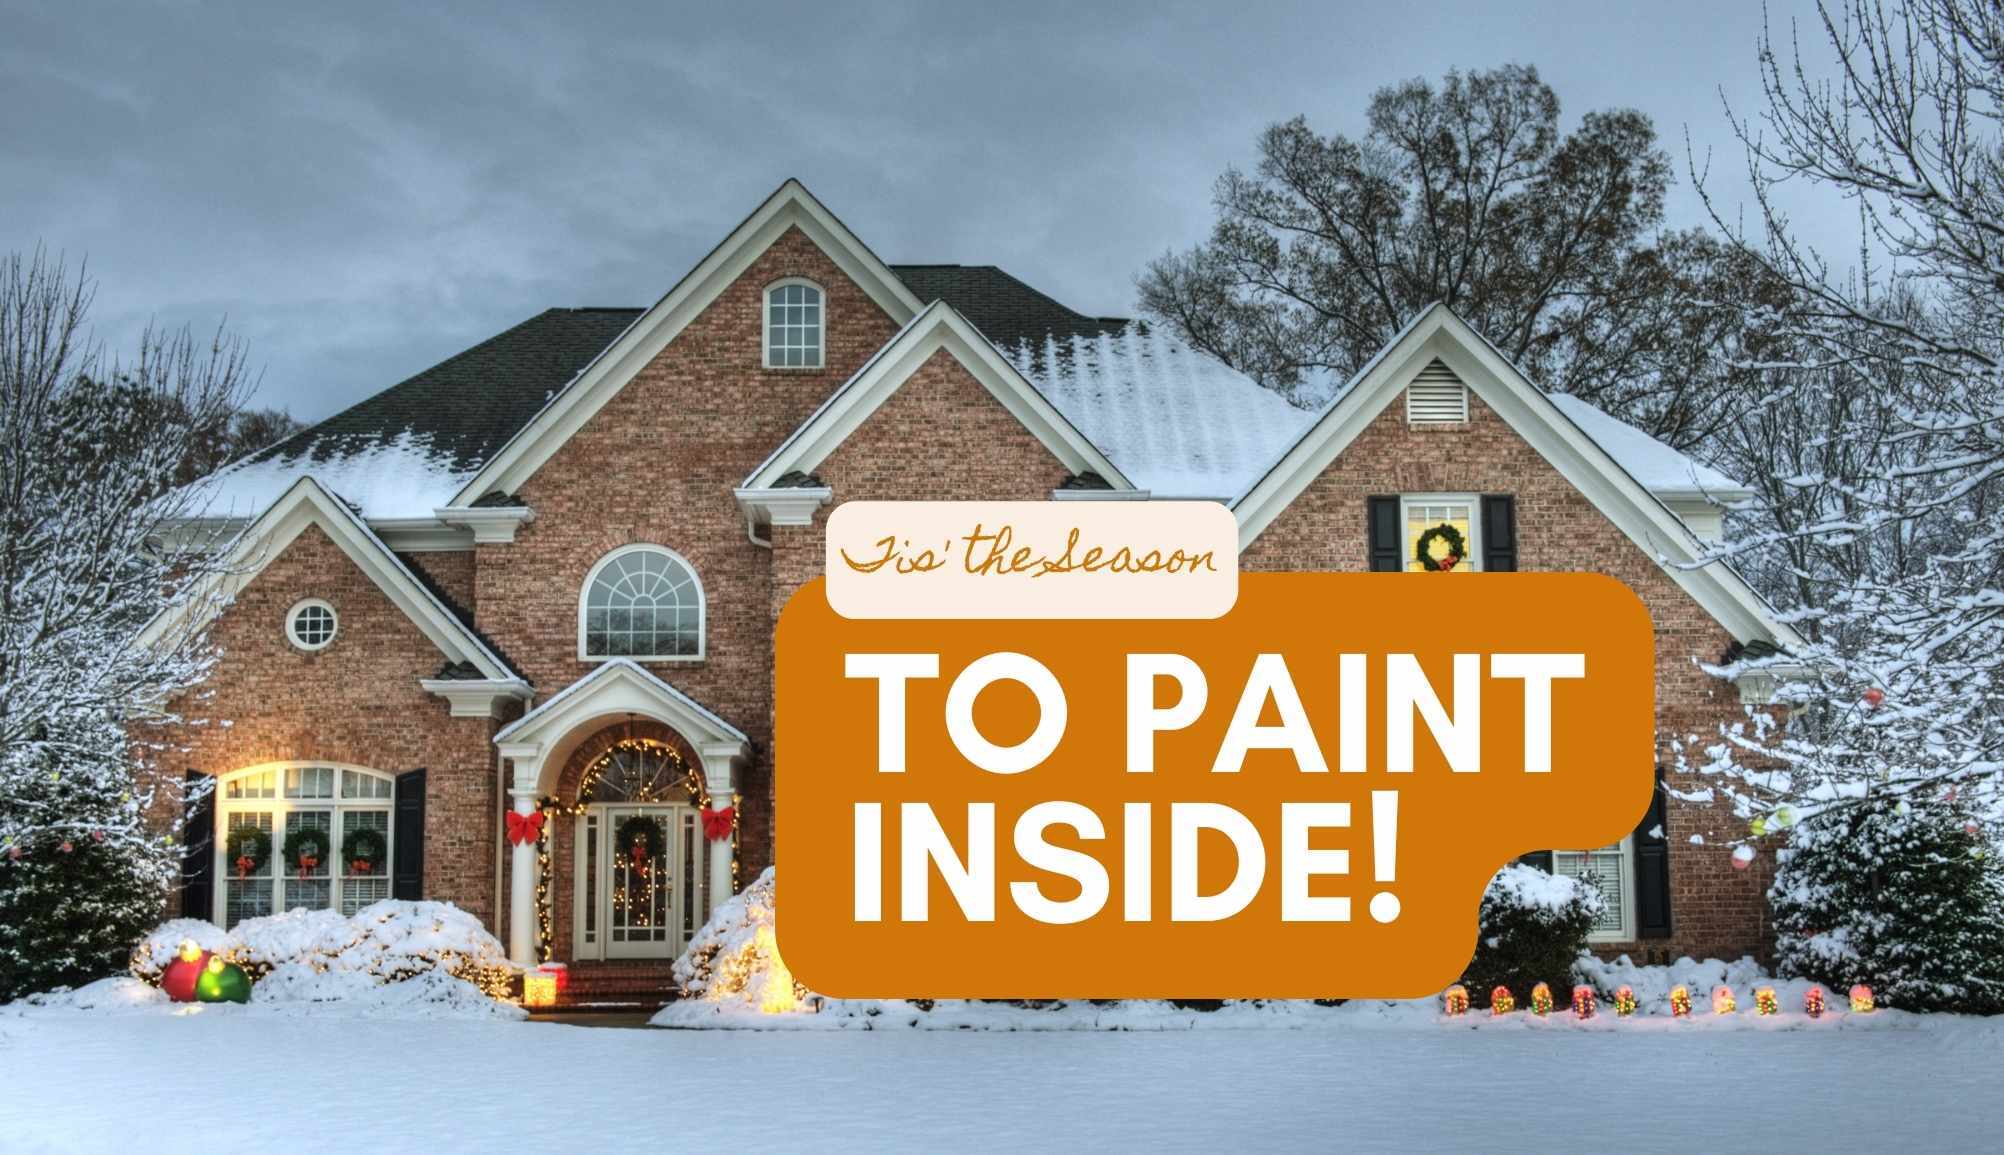 Interior painting during winter in Nashville